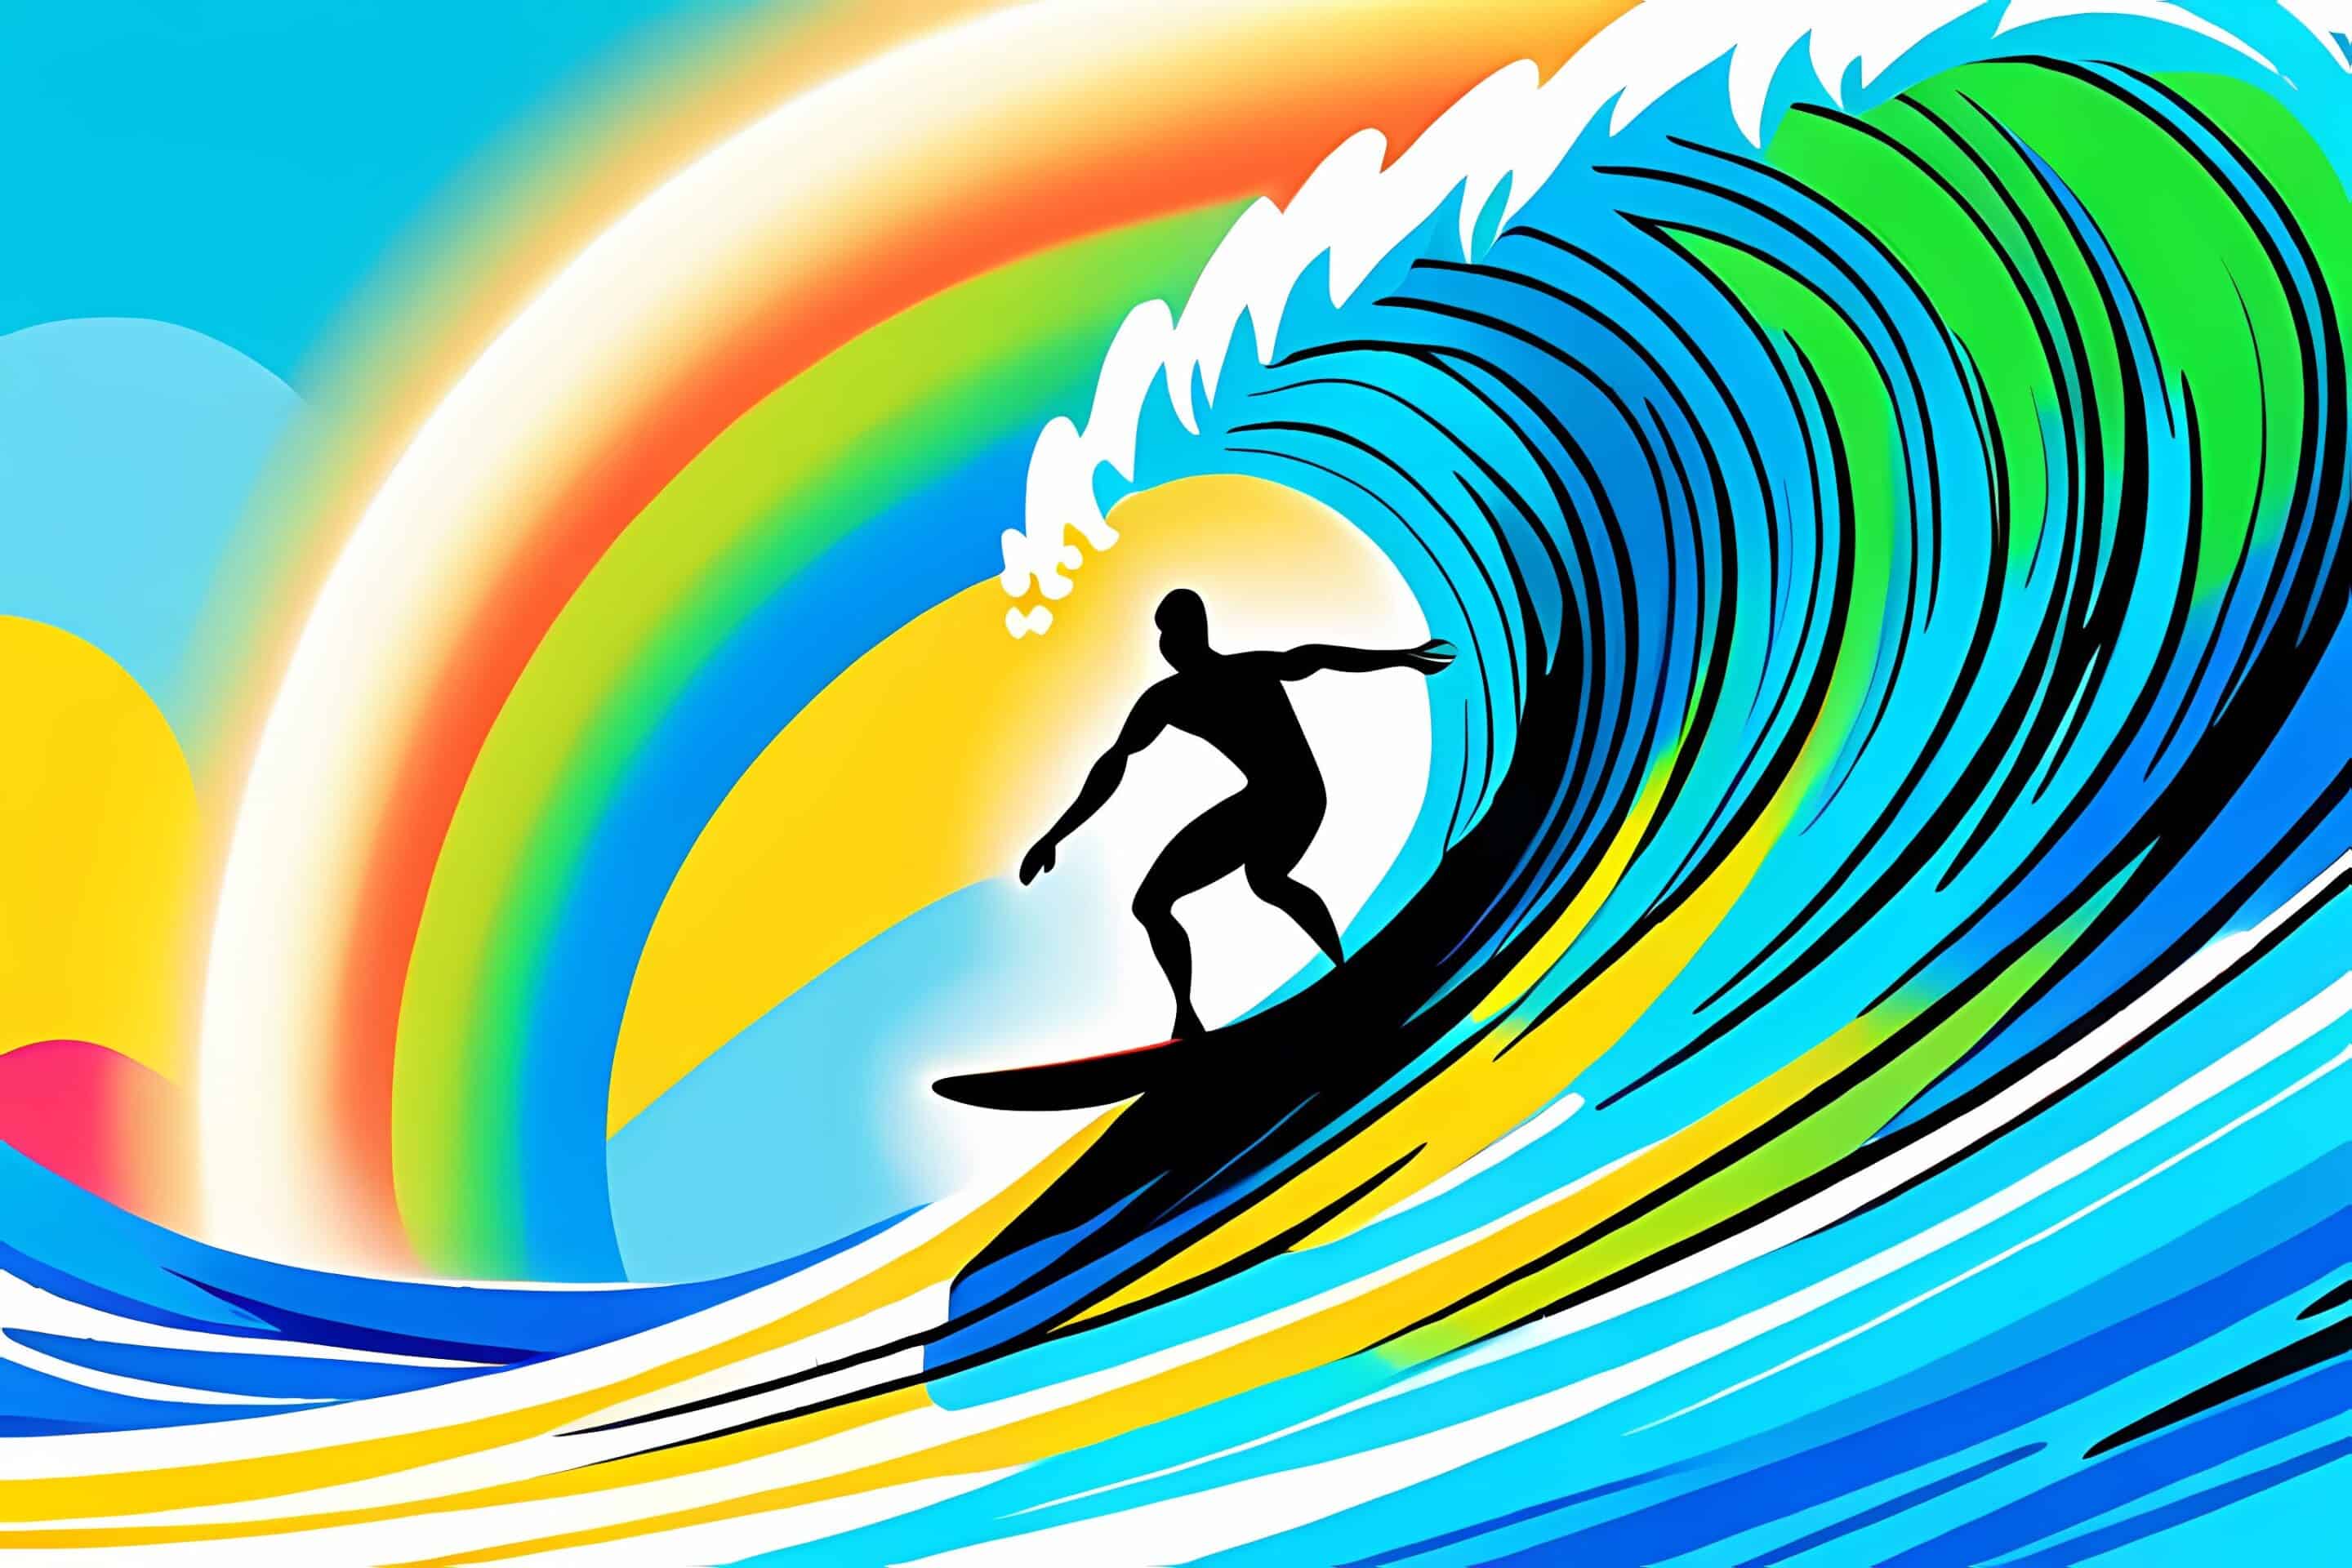 Riding Life’s Waves: Embrace the Surfboard of Opportunity